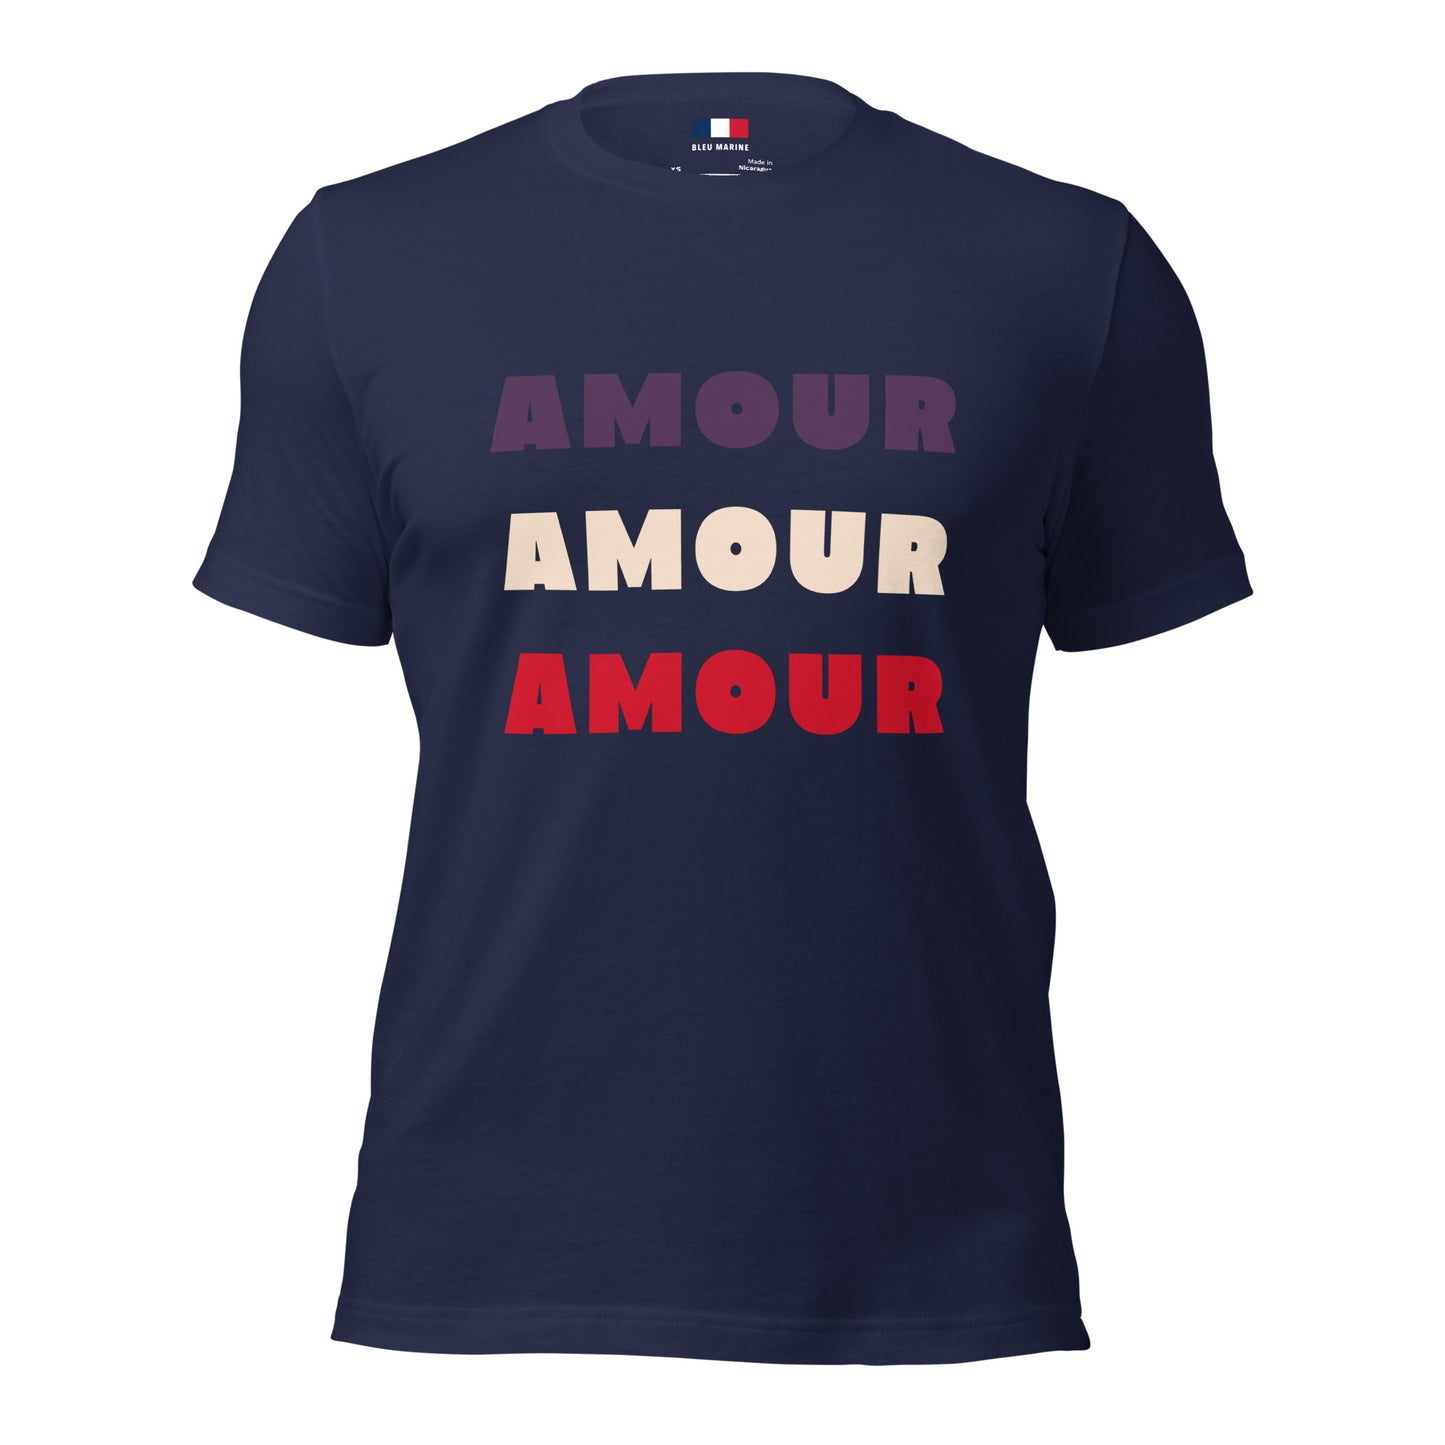 AMOUR AMOUR AMOUR Tee